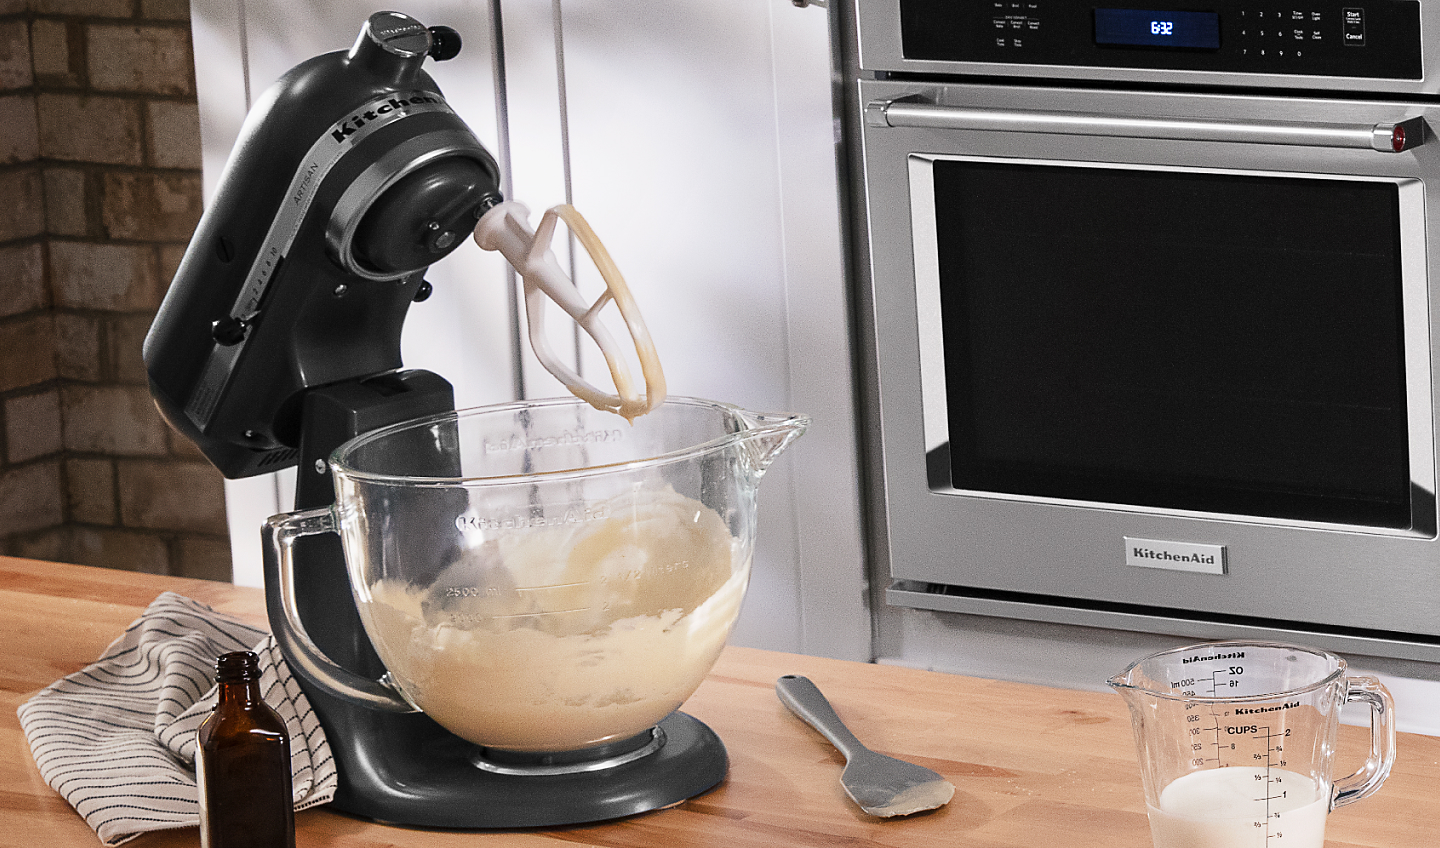 Black KitchenAid® stand mixer with Flat Beater Accessory and ingredients next to it